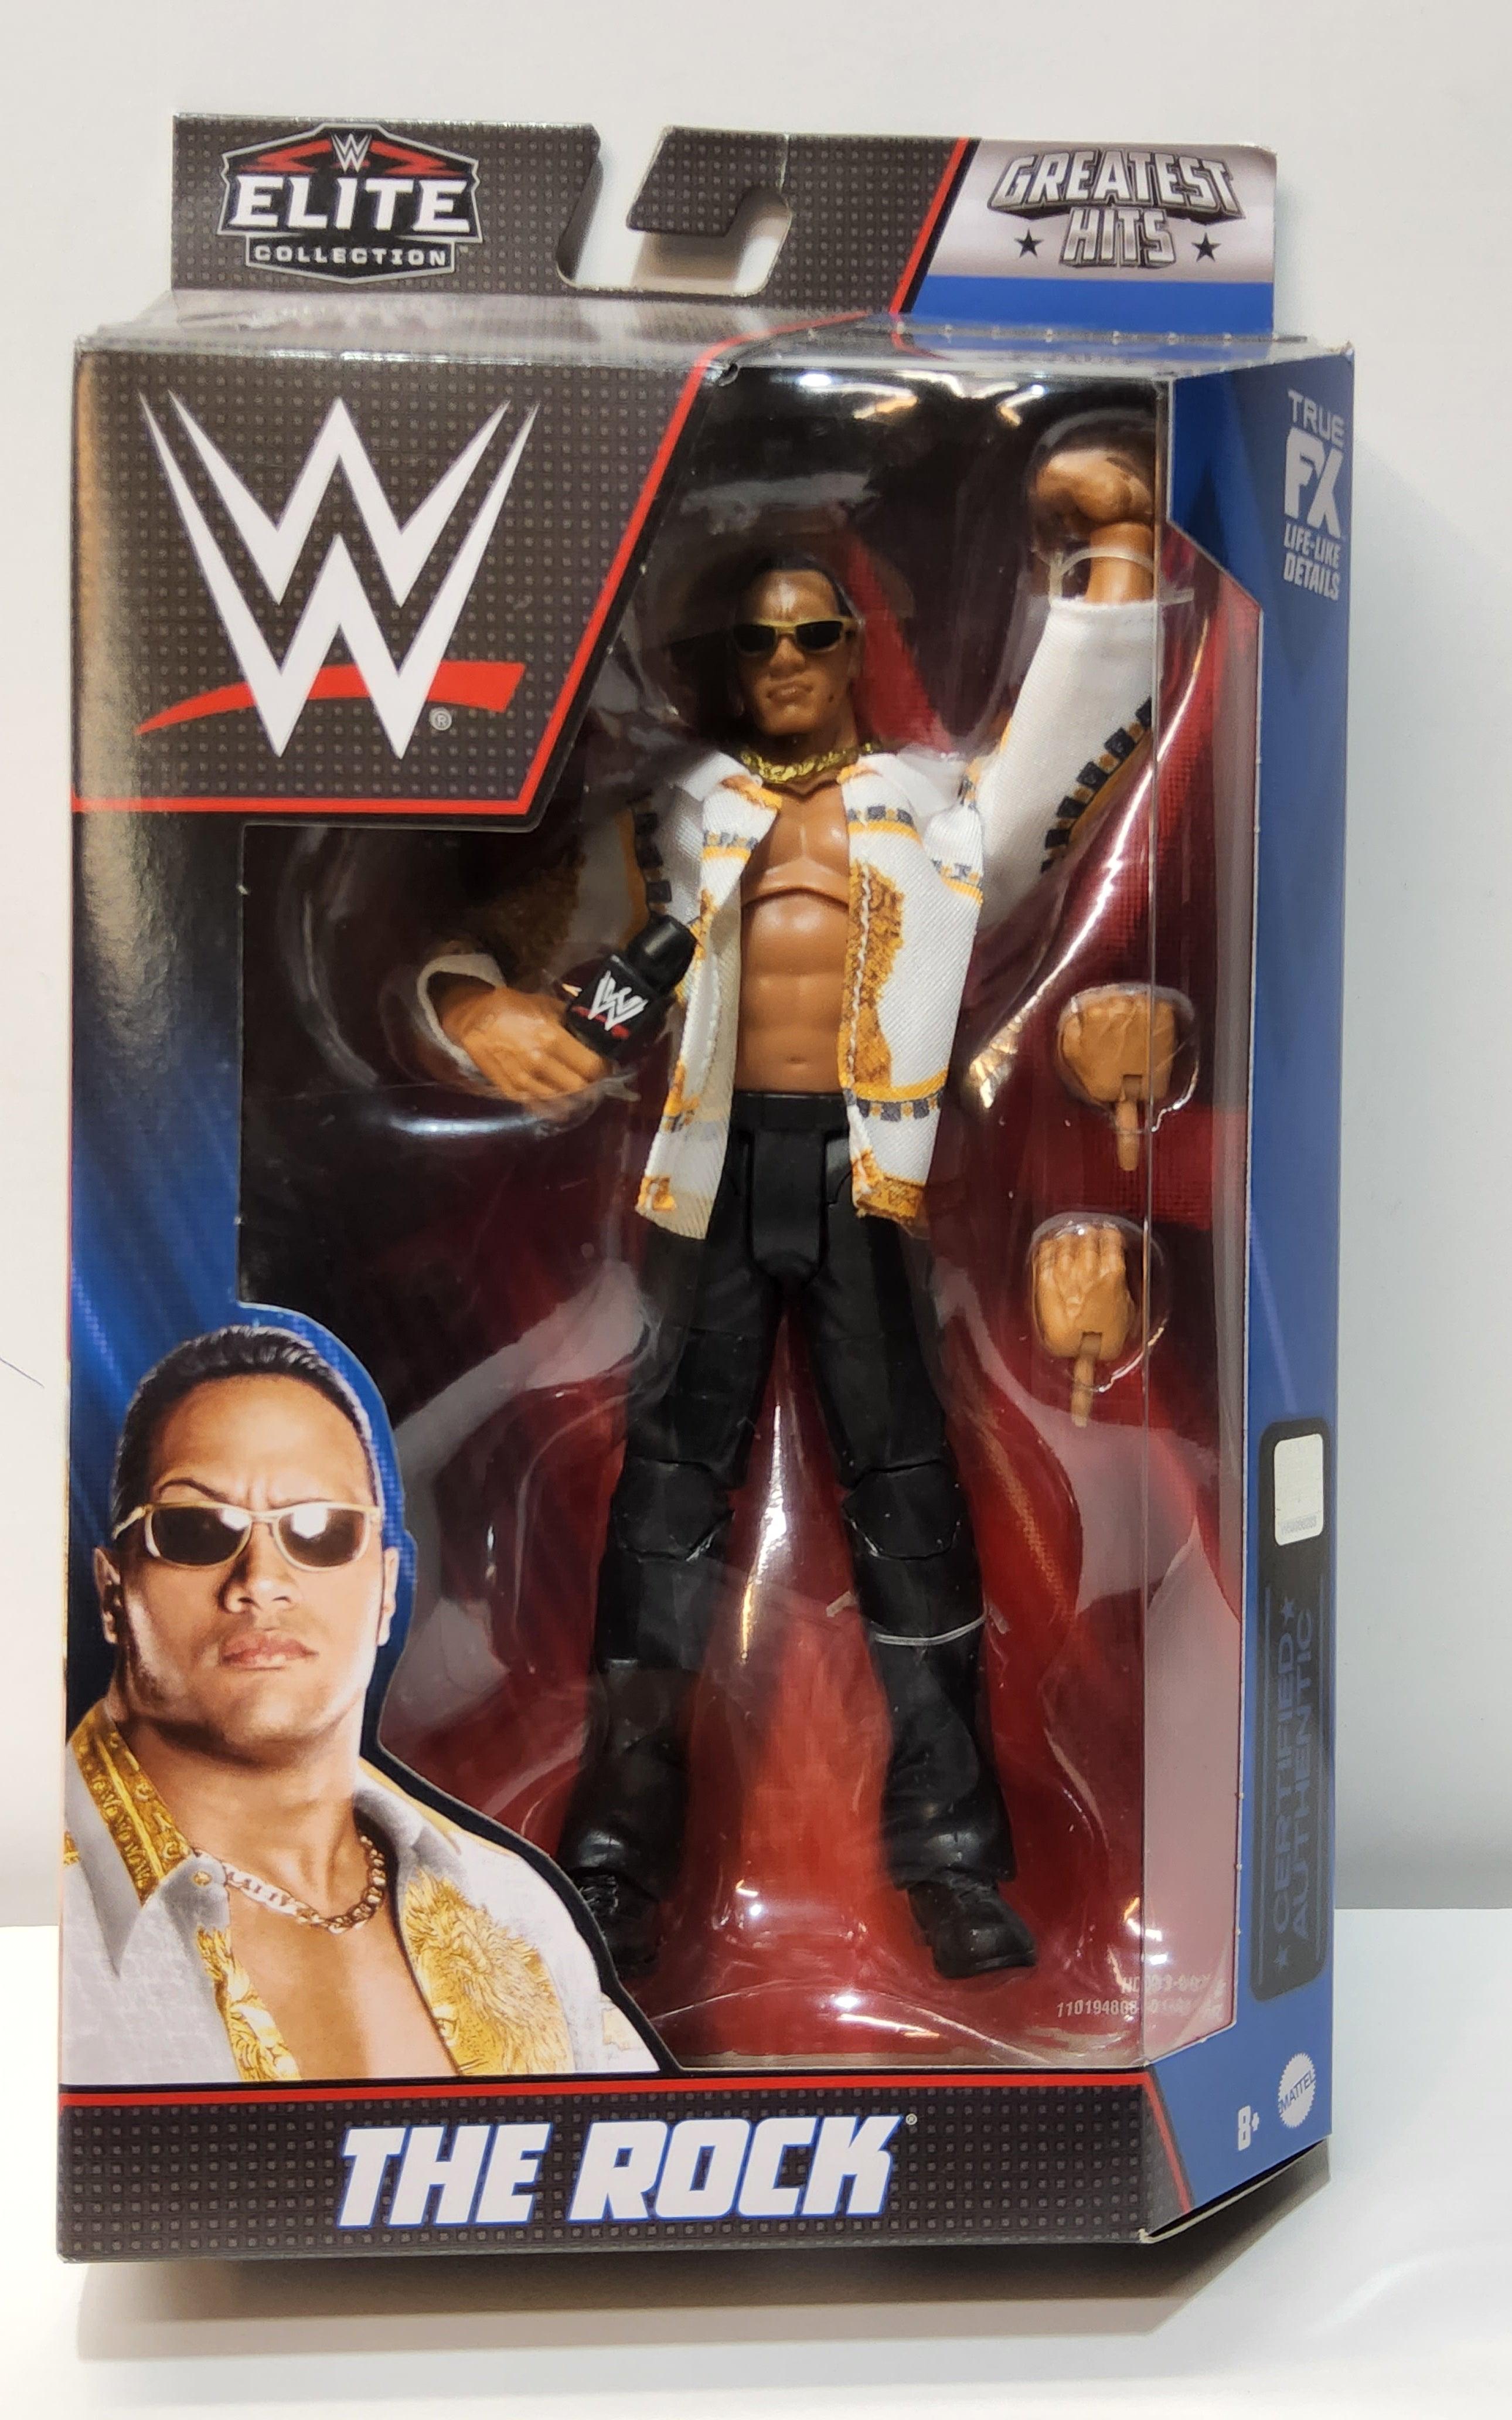  WWE Elite Collection Greatest Hits The Rock Action Figure :  Sports & Outdoors